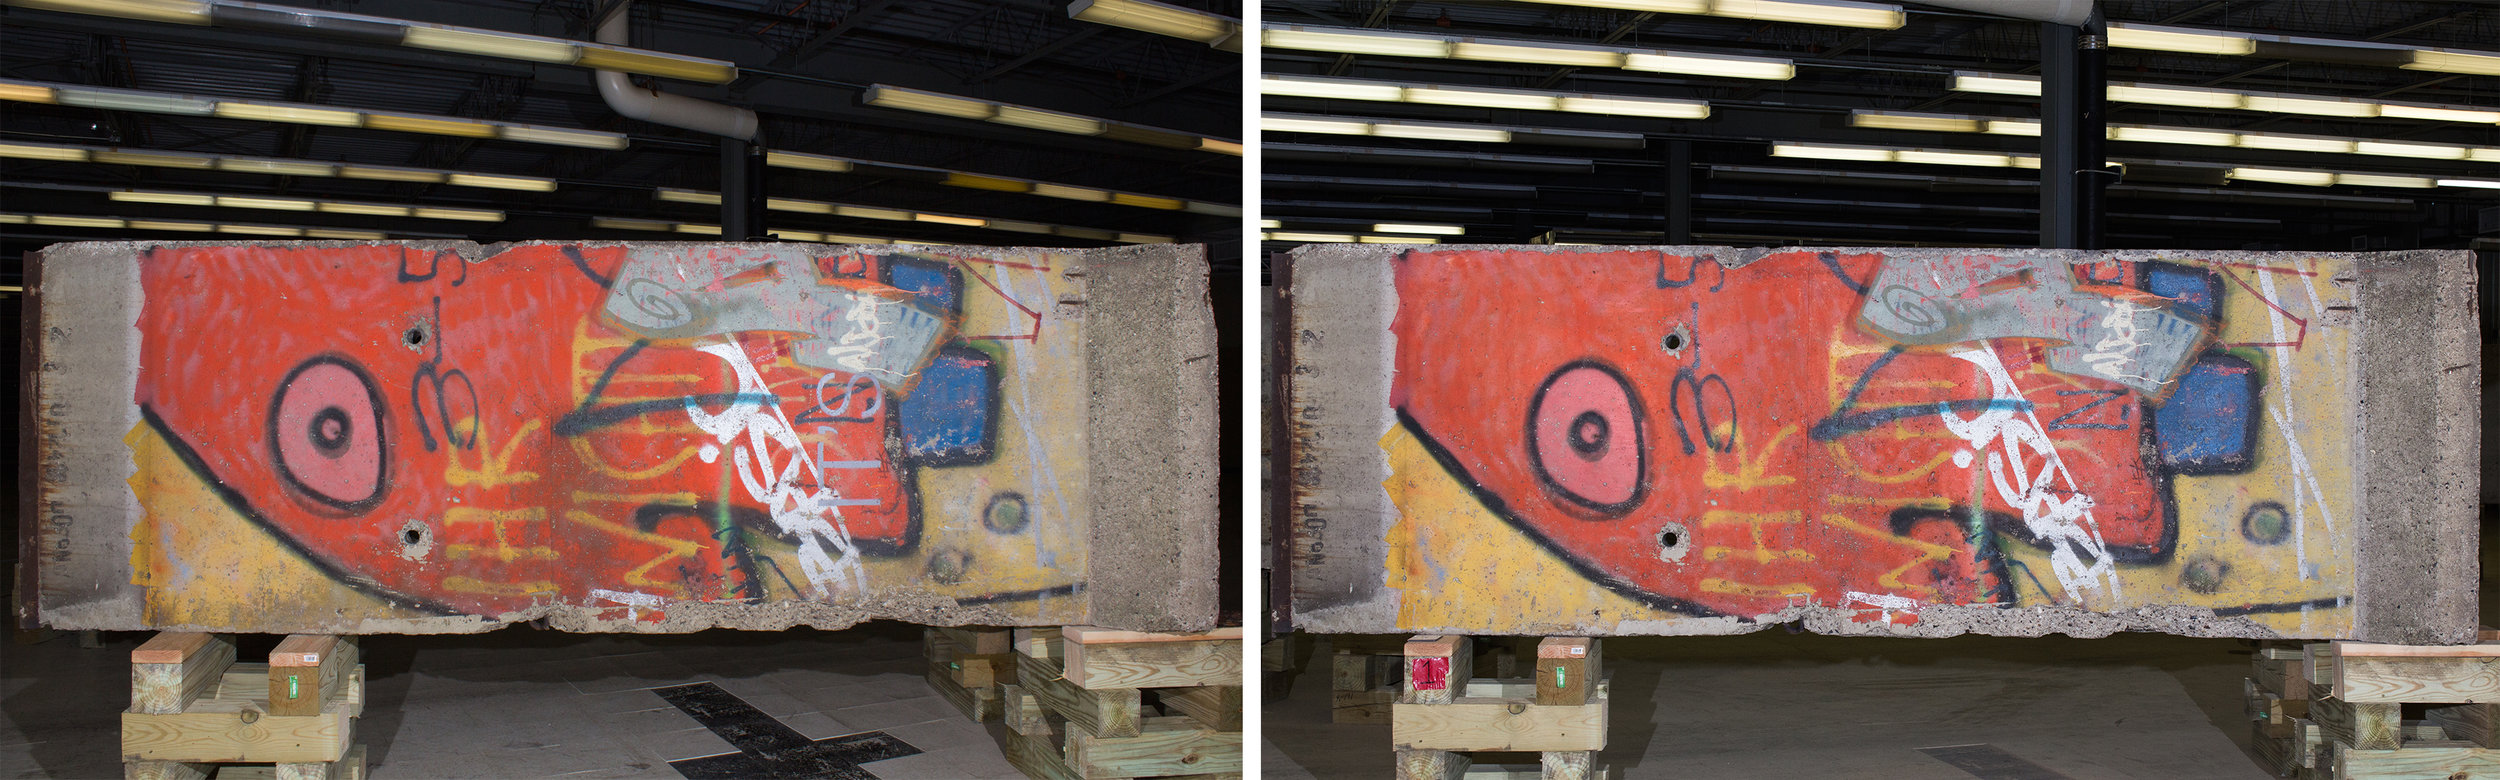  Segment 96.&nbsp;Before (left) and After conservation treatment (right).  Image © Katey Corda, 2015 